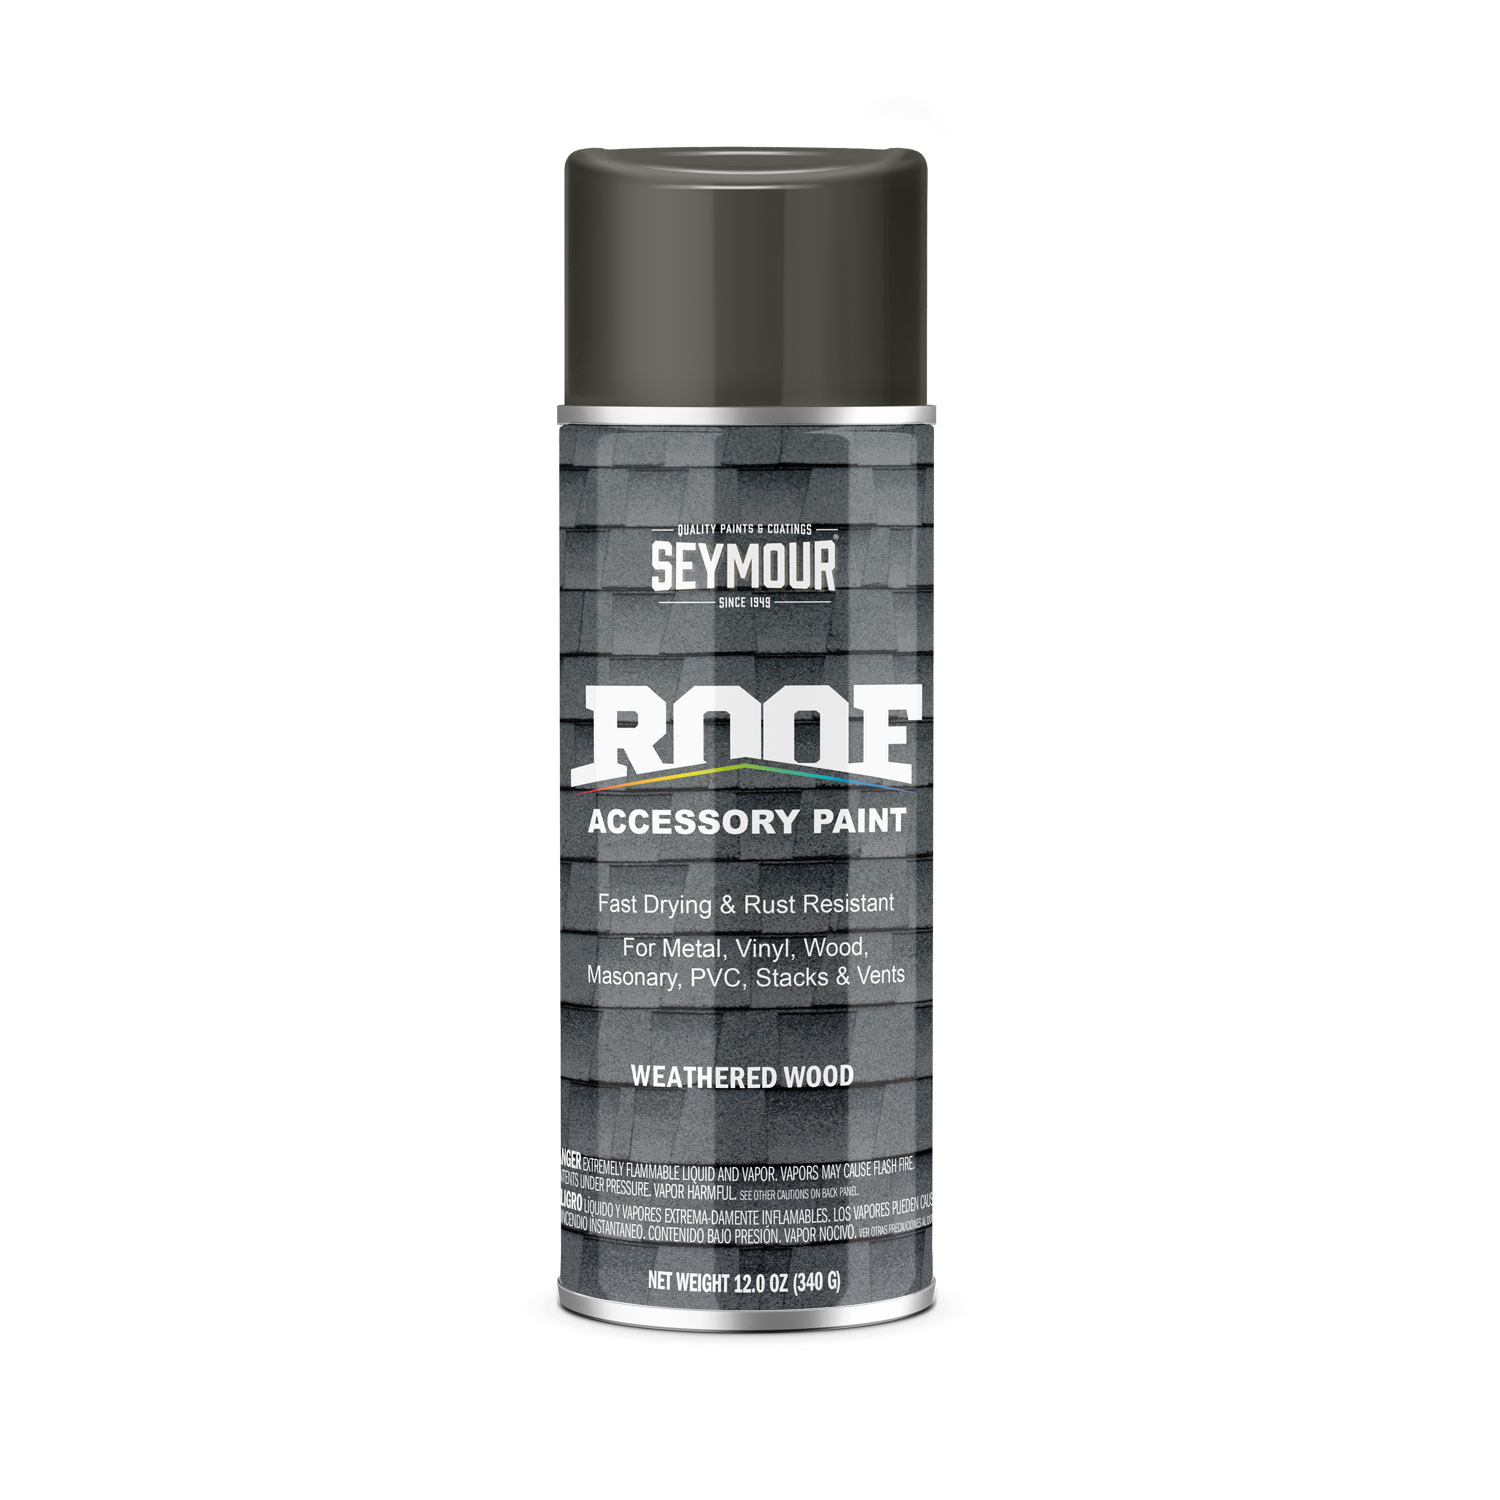 16-1700 Seymour Roof Accessory Paint